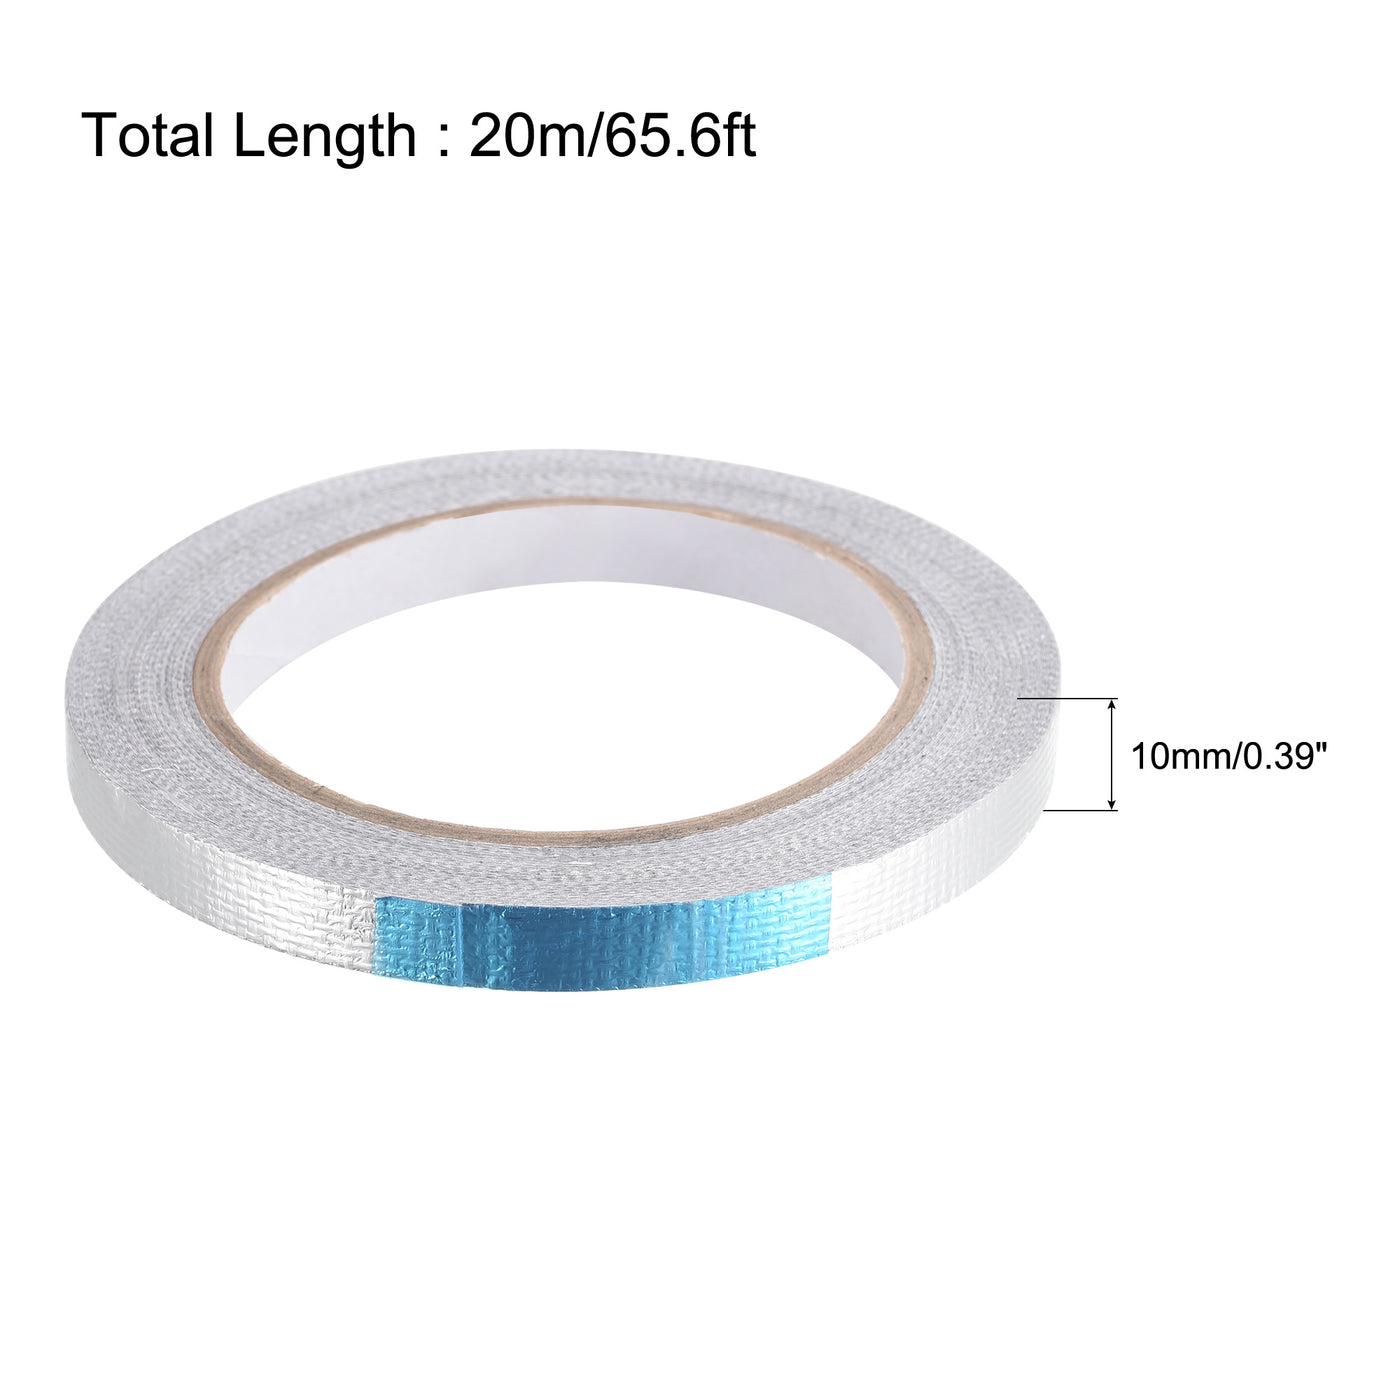 uxcell Uxcell Aluminum Foil Tape High-Temperature Tape for HVAC,Sealing 10mmx20m/65ft